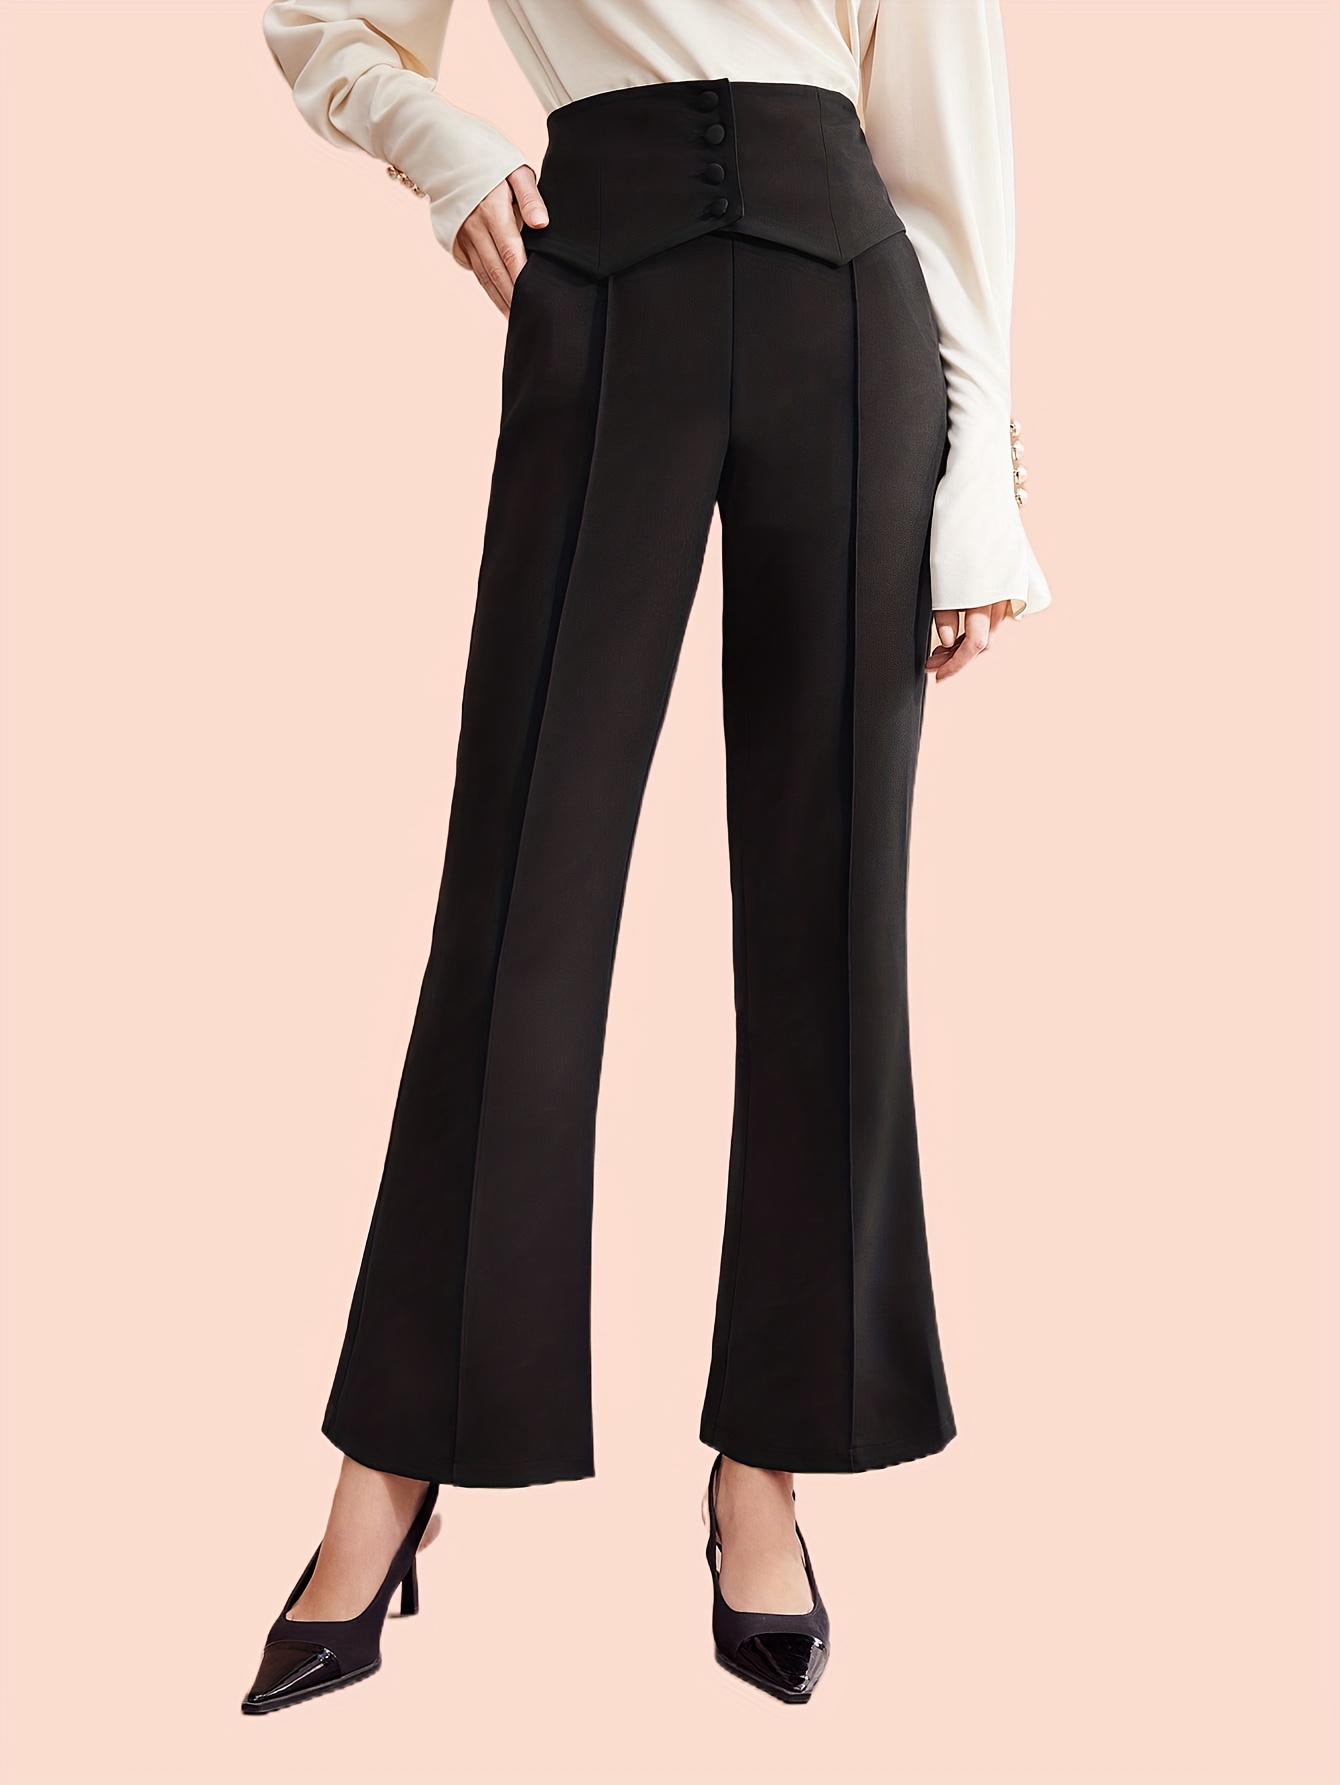 Womens High Waist Slim Fit Flared Trousers Trendy Casual Office Work Pants  Party